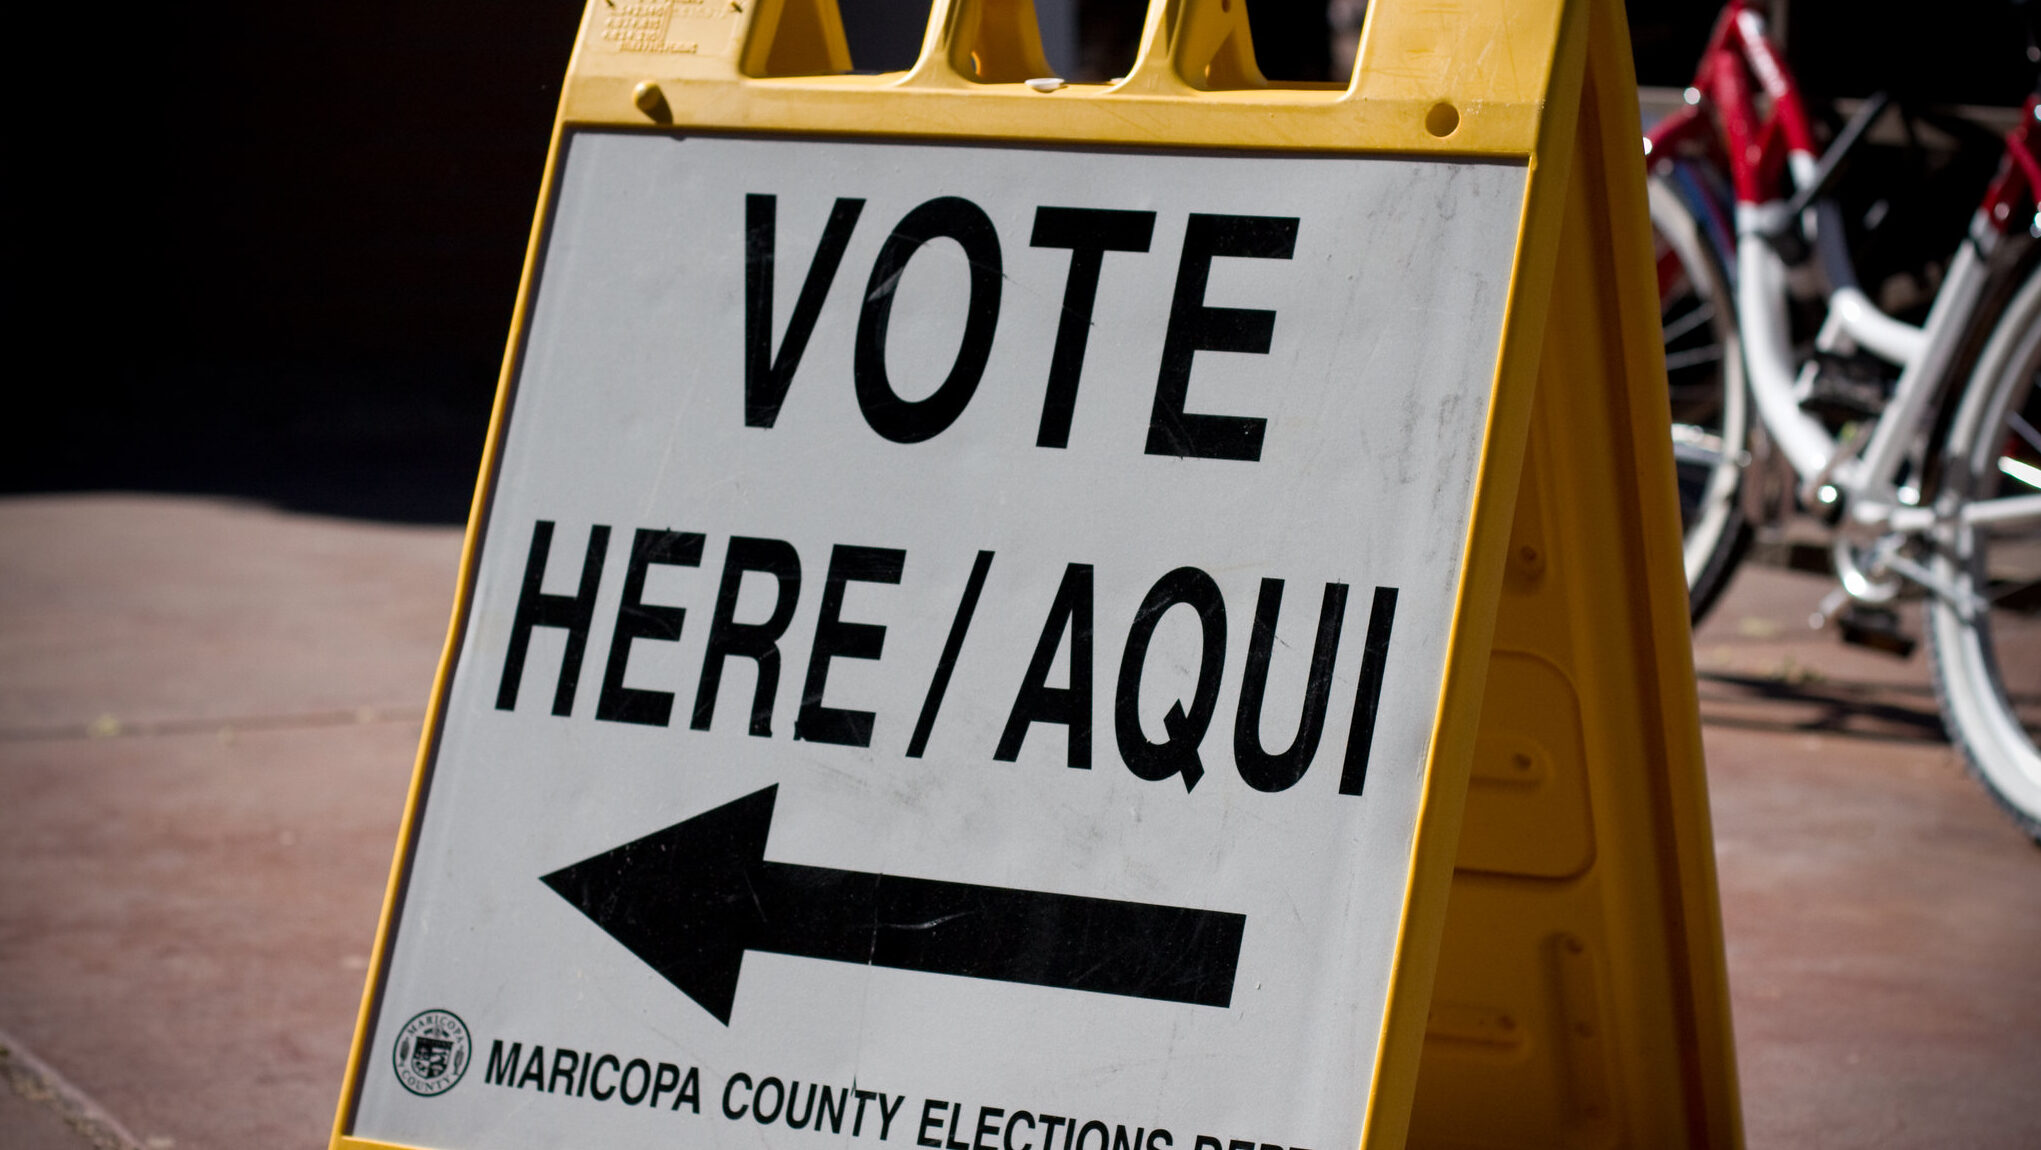 Arizona can reject voter registrations without citizenship proof, court rules